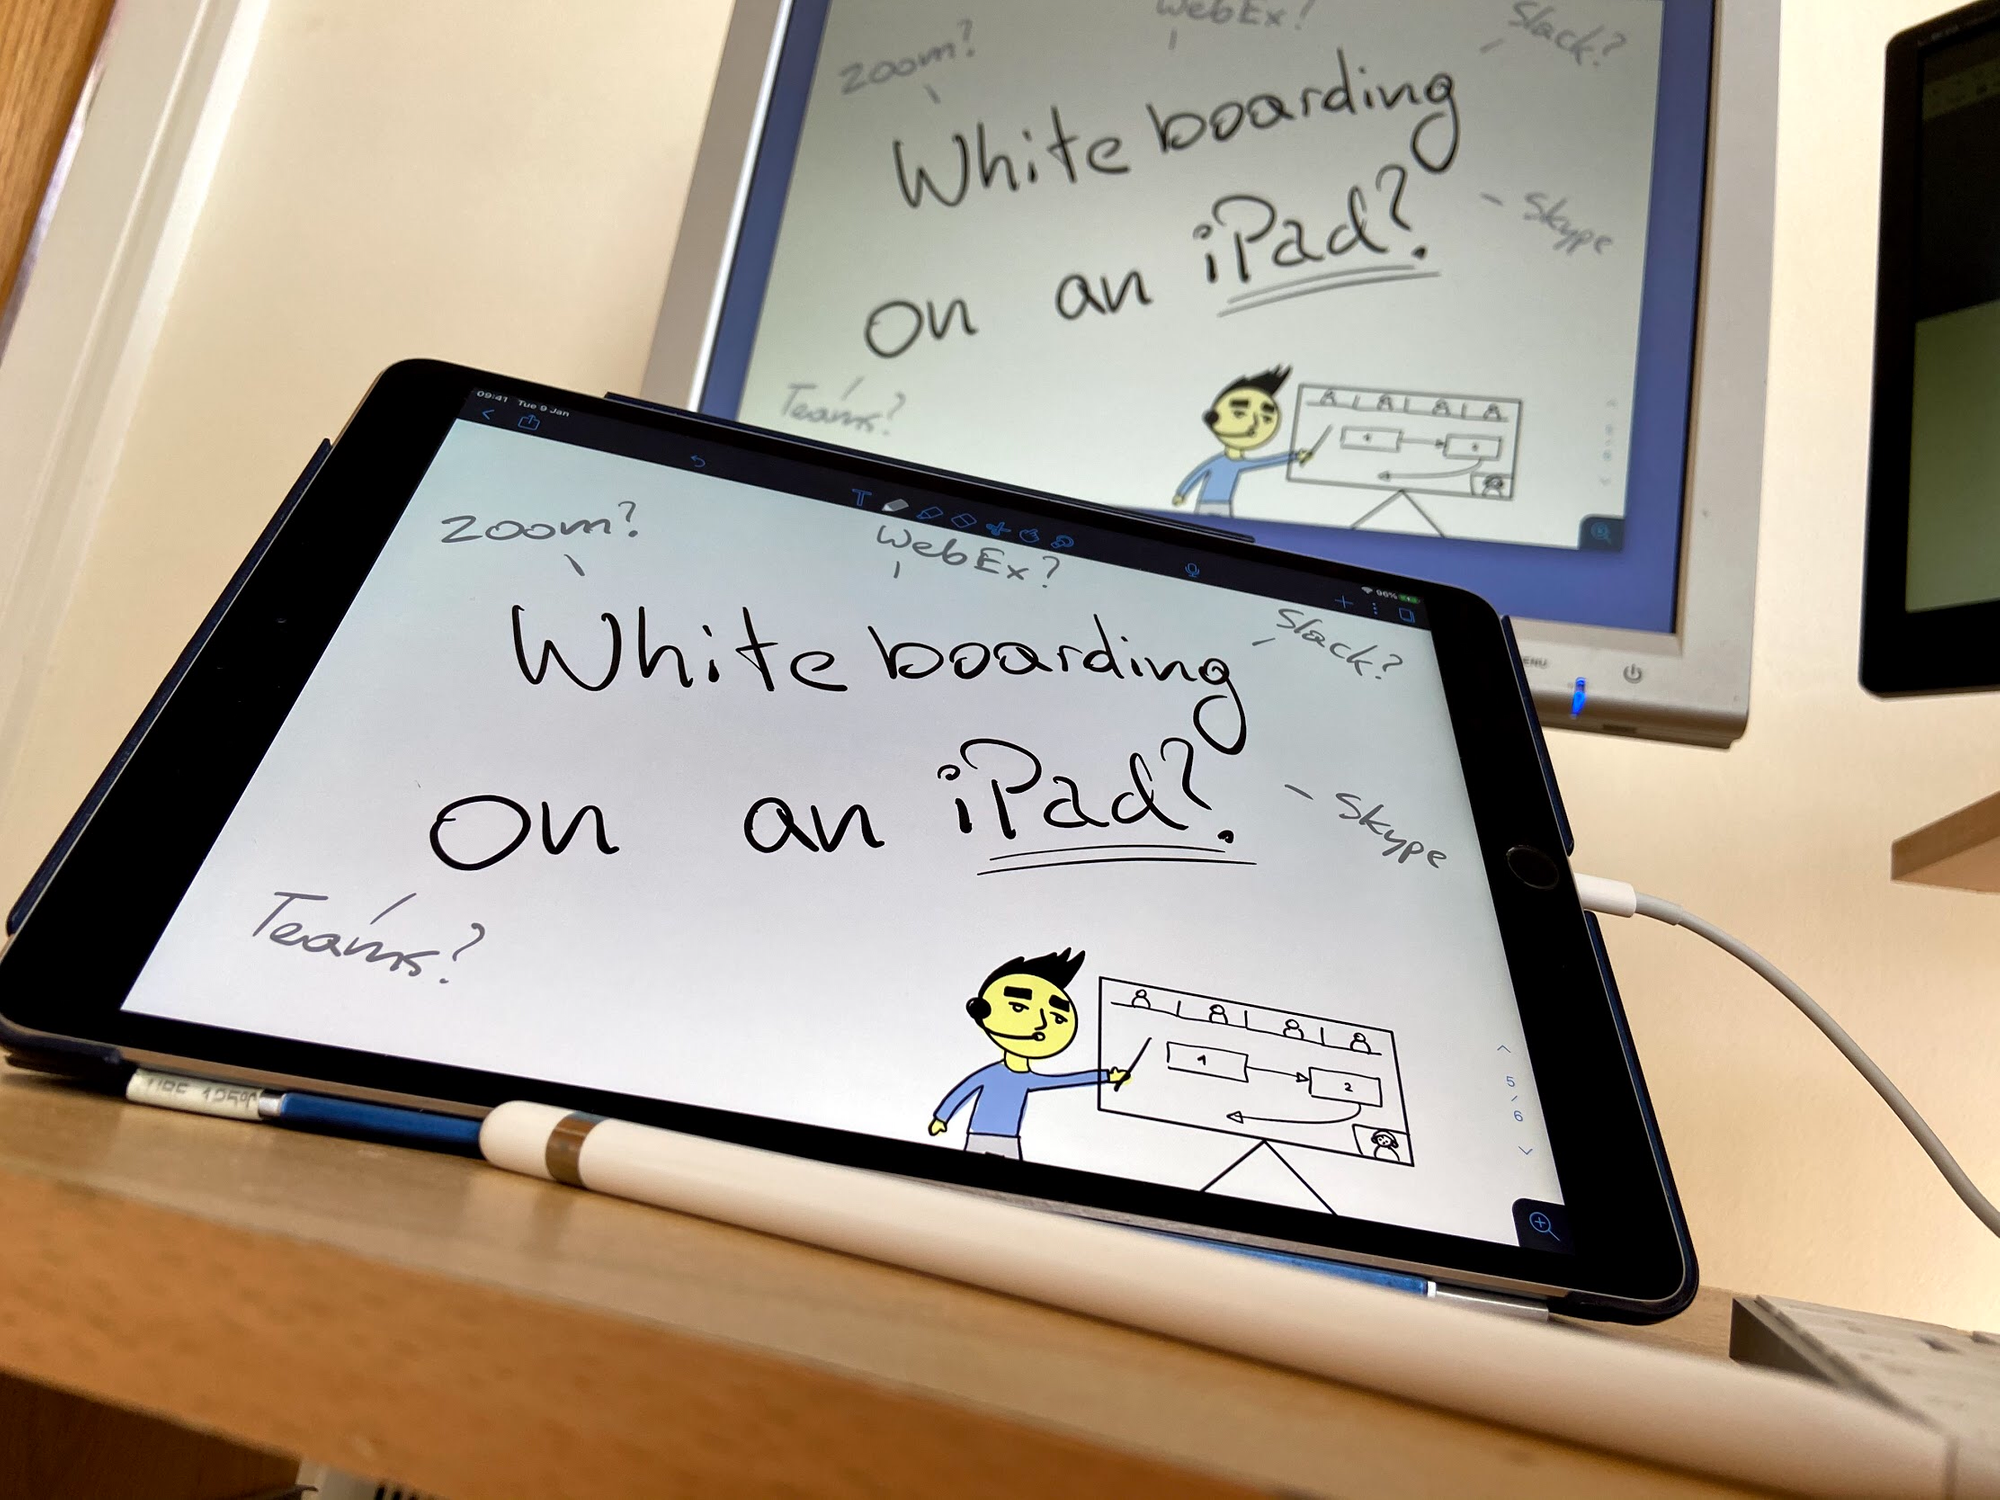 How to use an iPad as a whiteboard in Zoom?